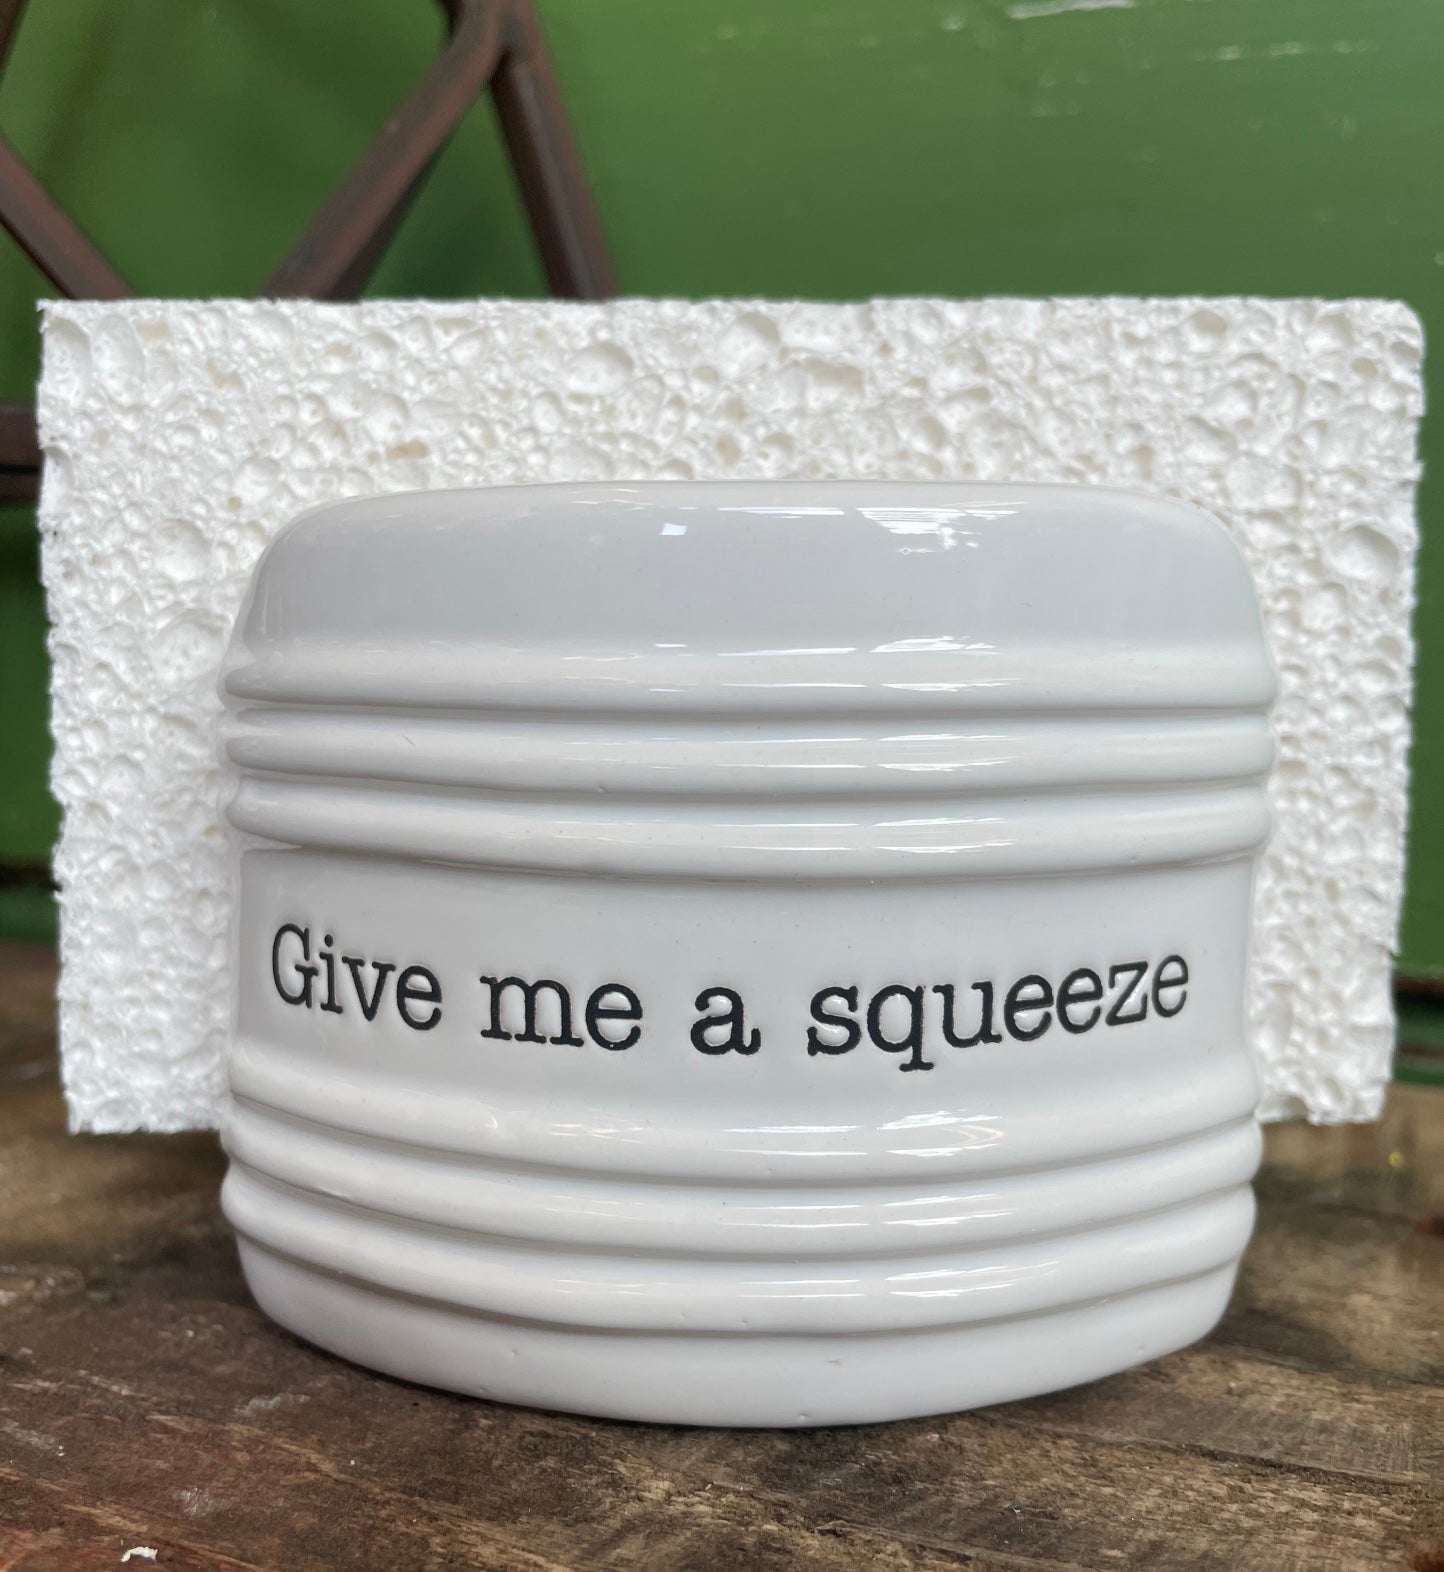 ceramic "give me a squeeze" sponge holder